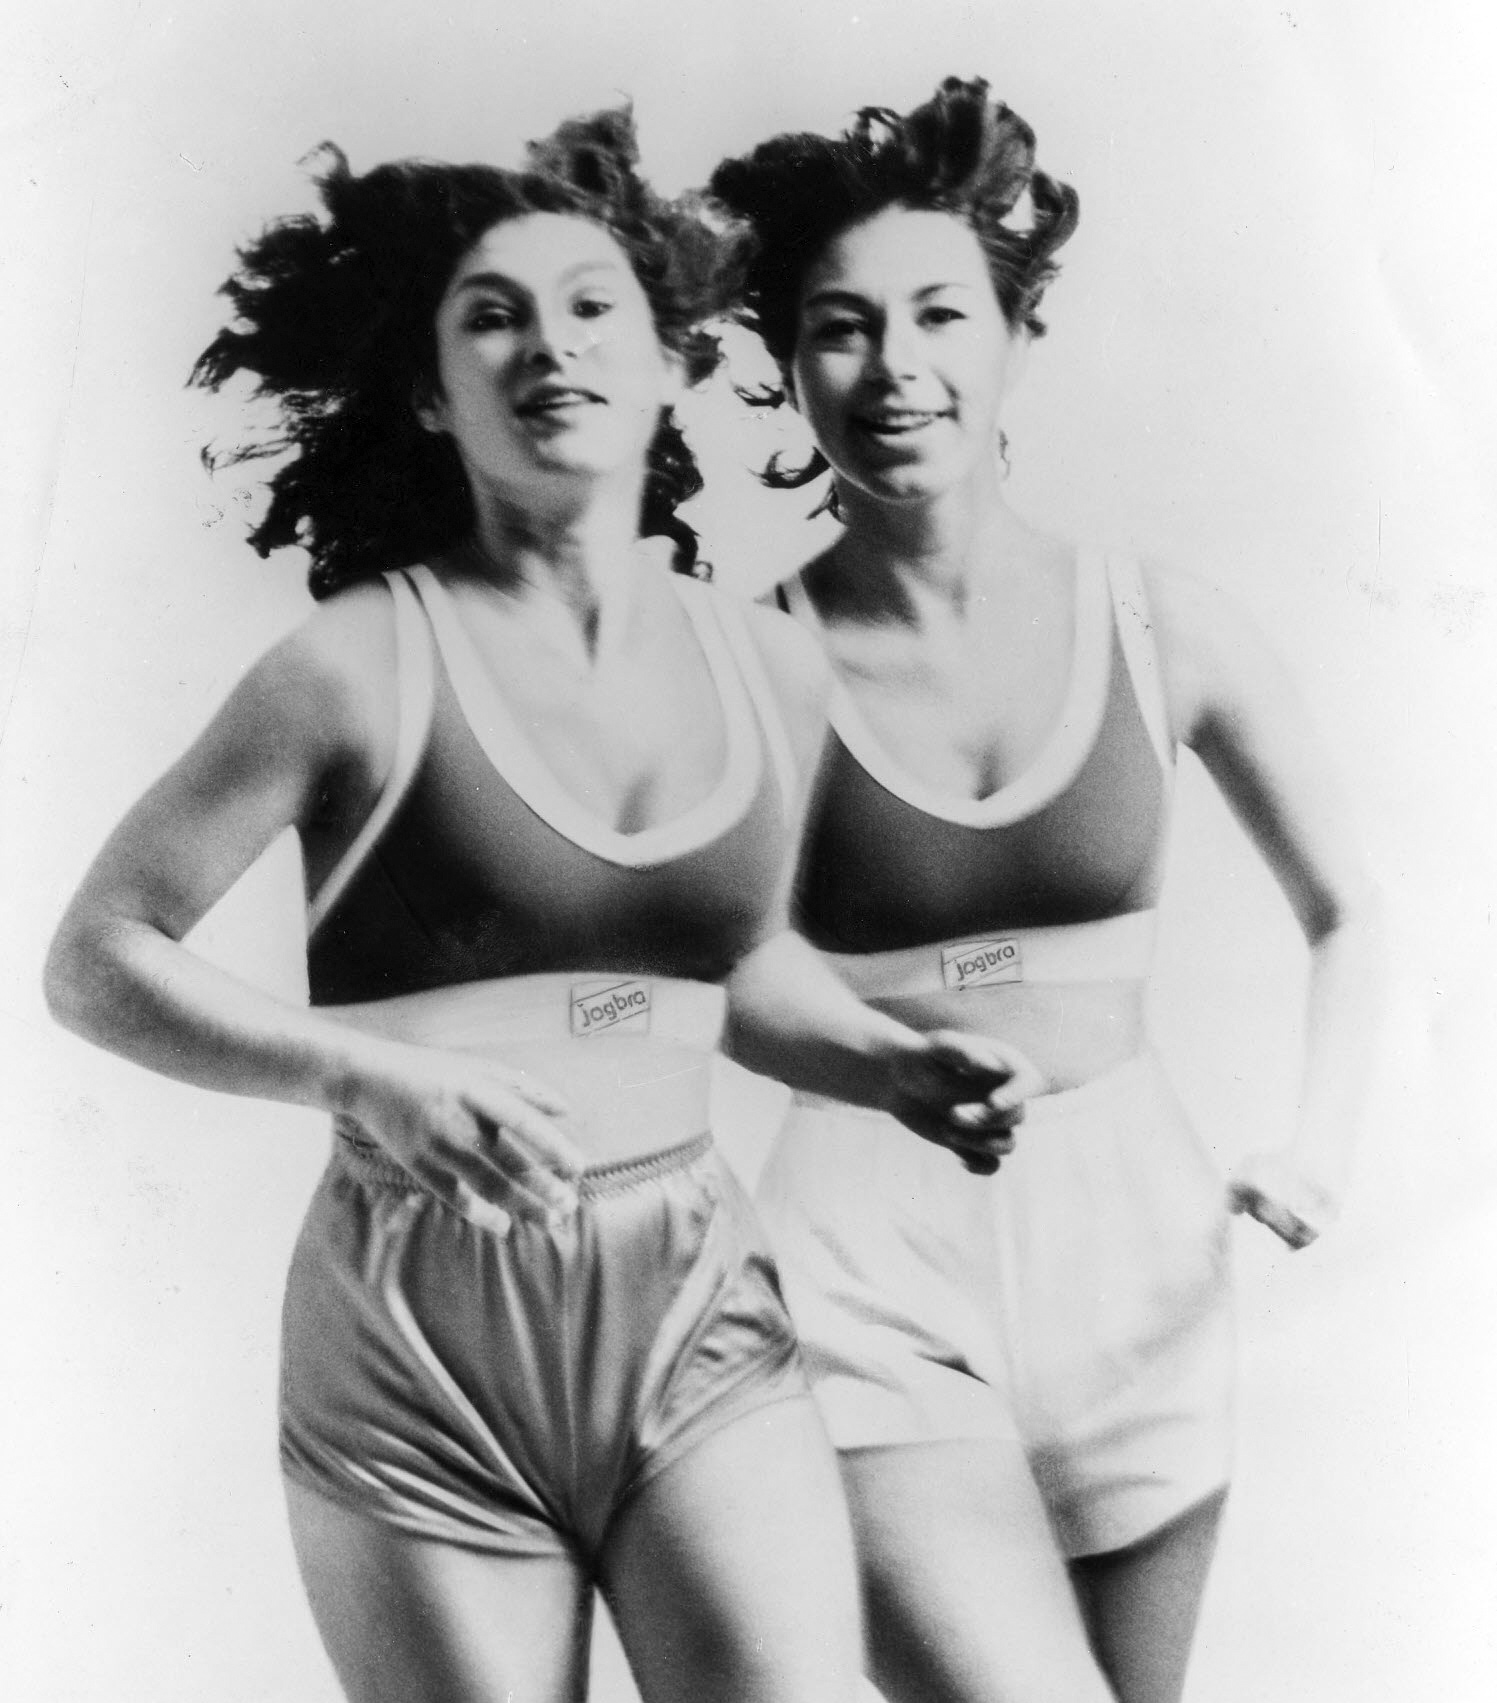  Photo ad of young Hinda Miller and Lisa Lindahl running in their Jogbras.